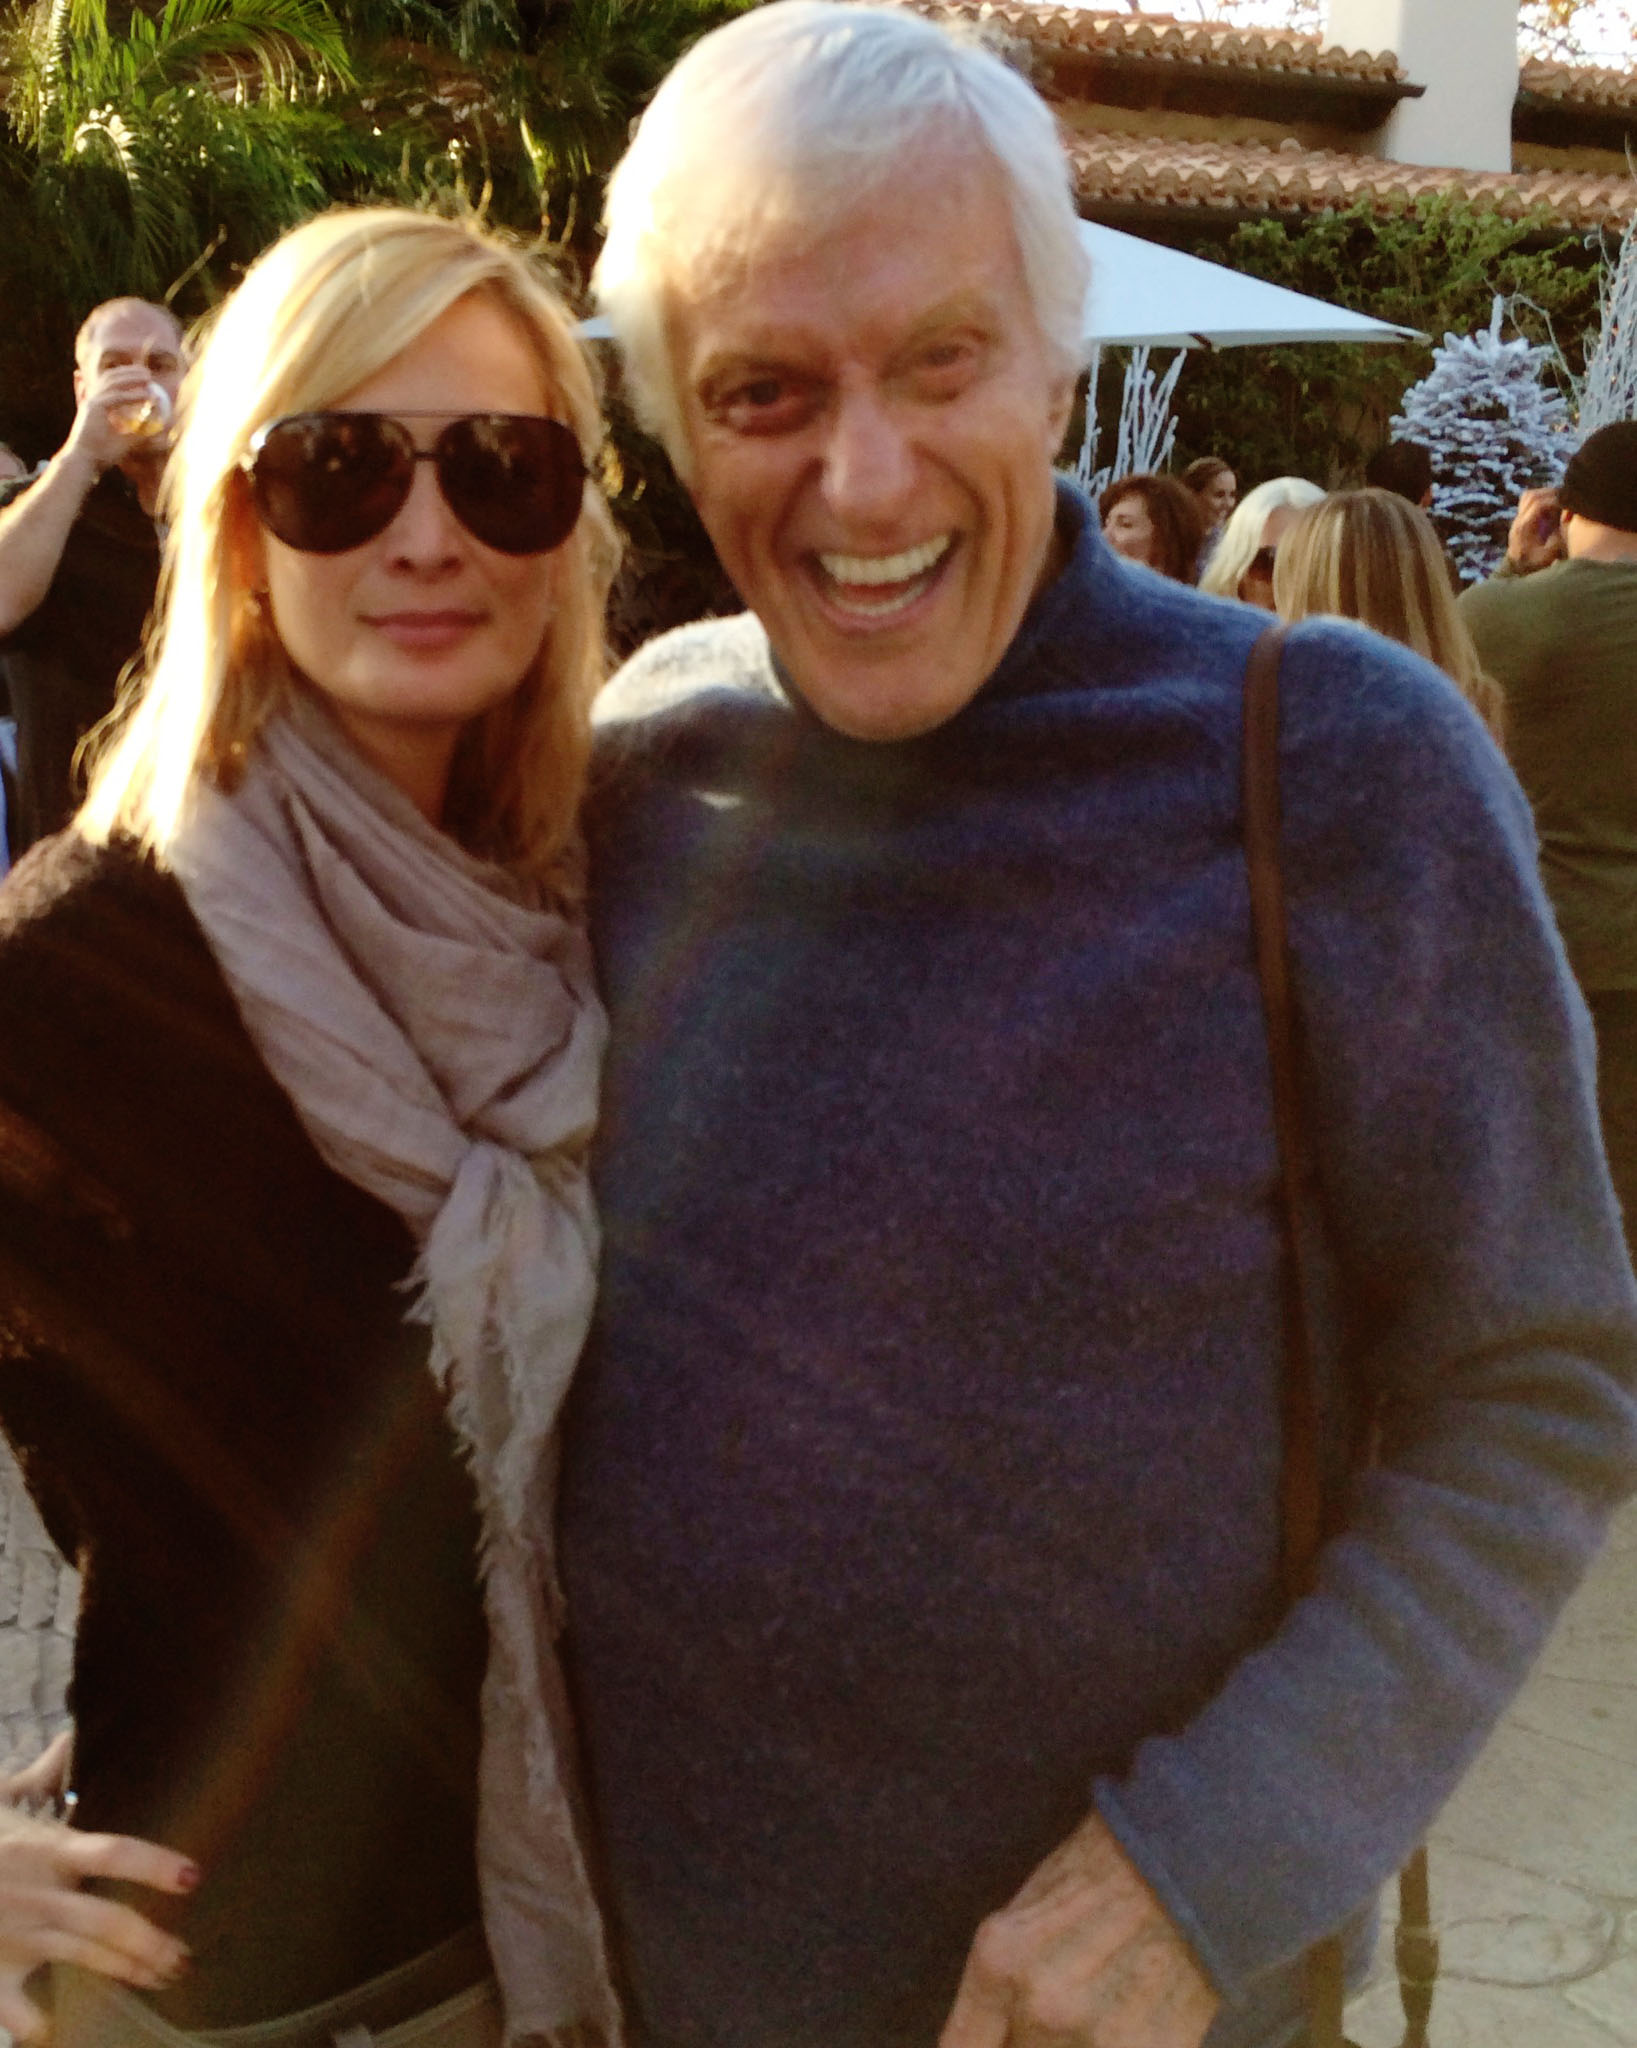 Blueyed Producer Jamee Natella with Dick Van Dyke at John Paul DeJoria (Paul Mitchell, Patron Tequila) Holiday Party.